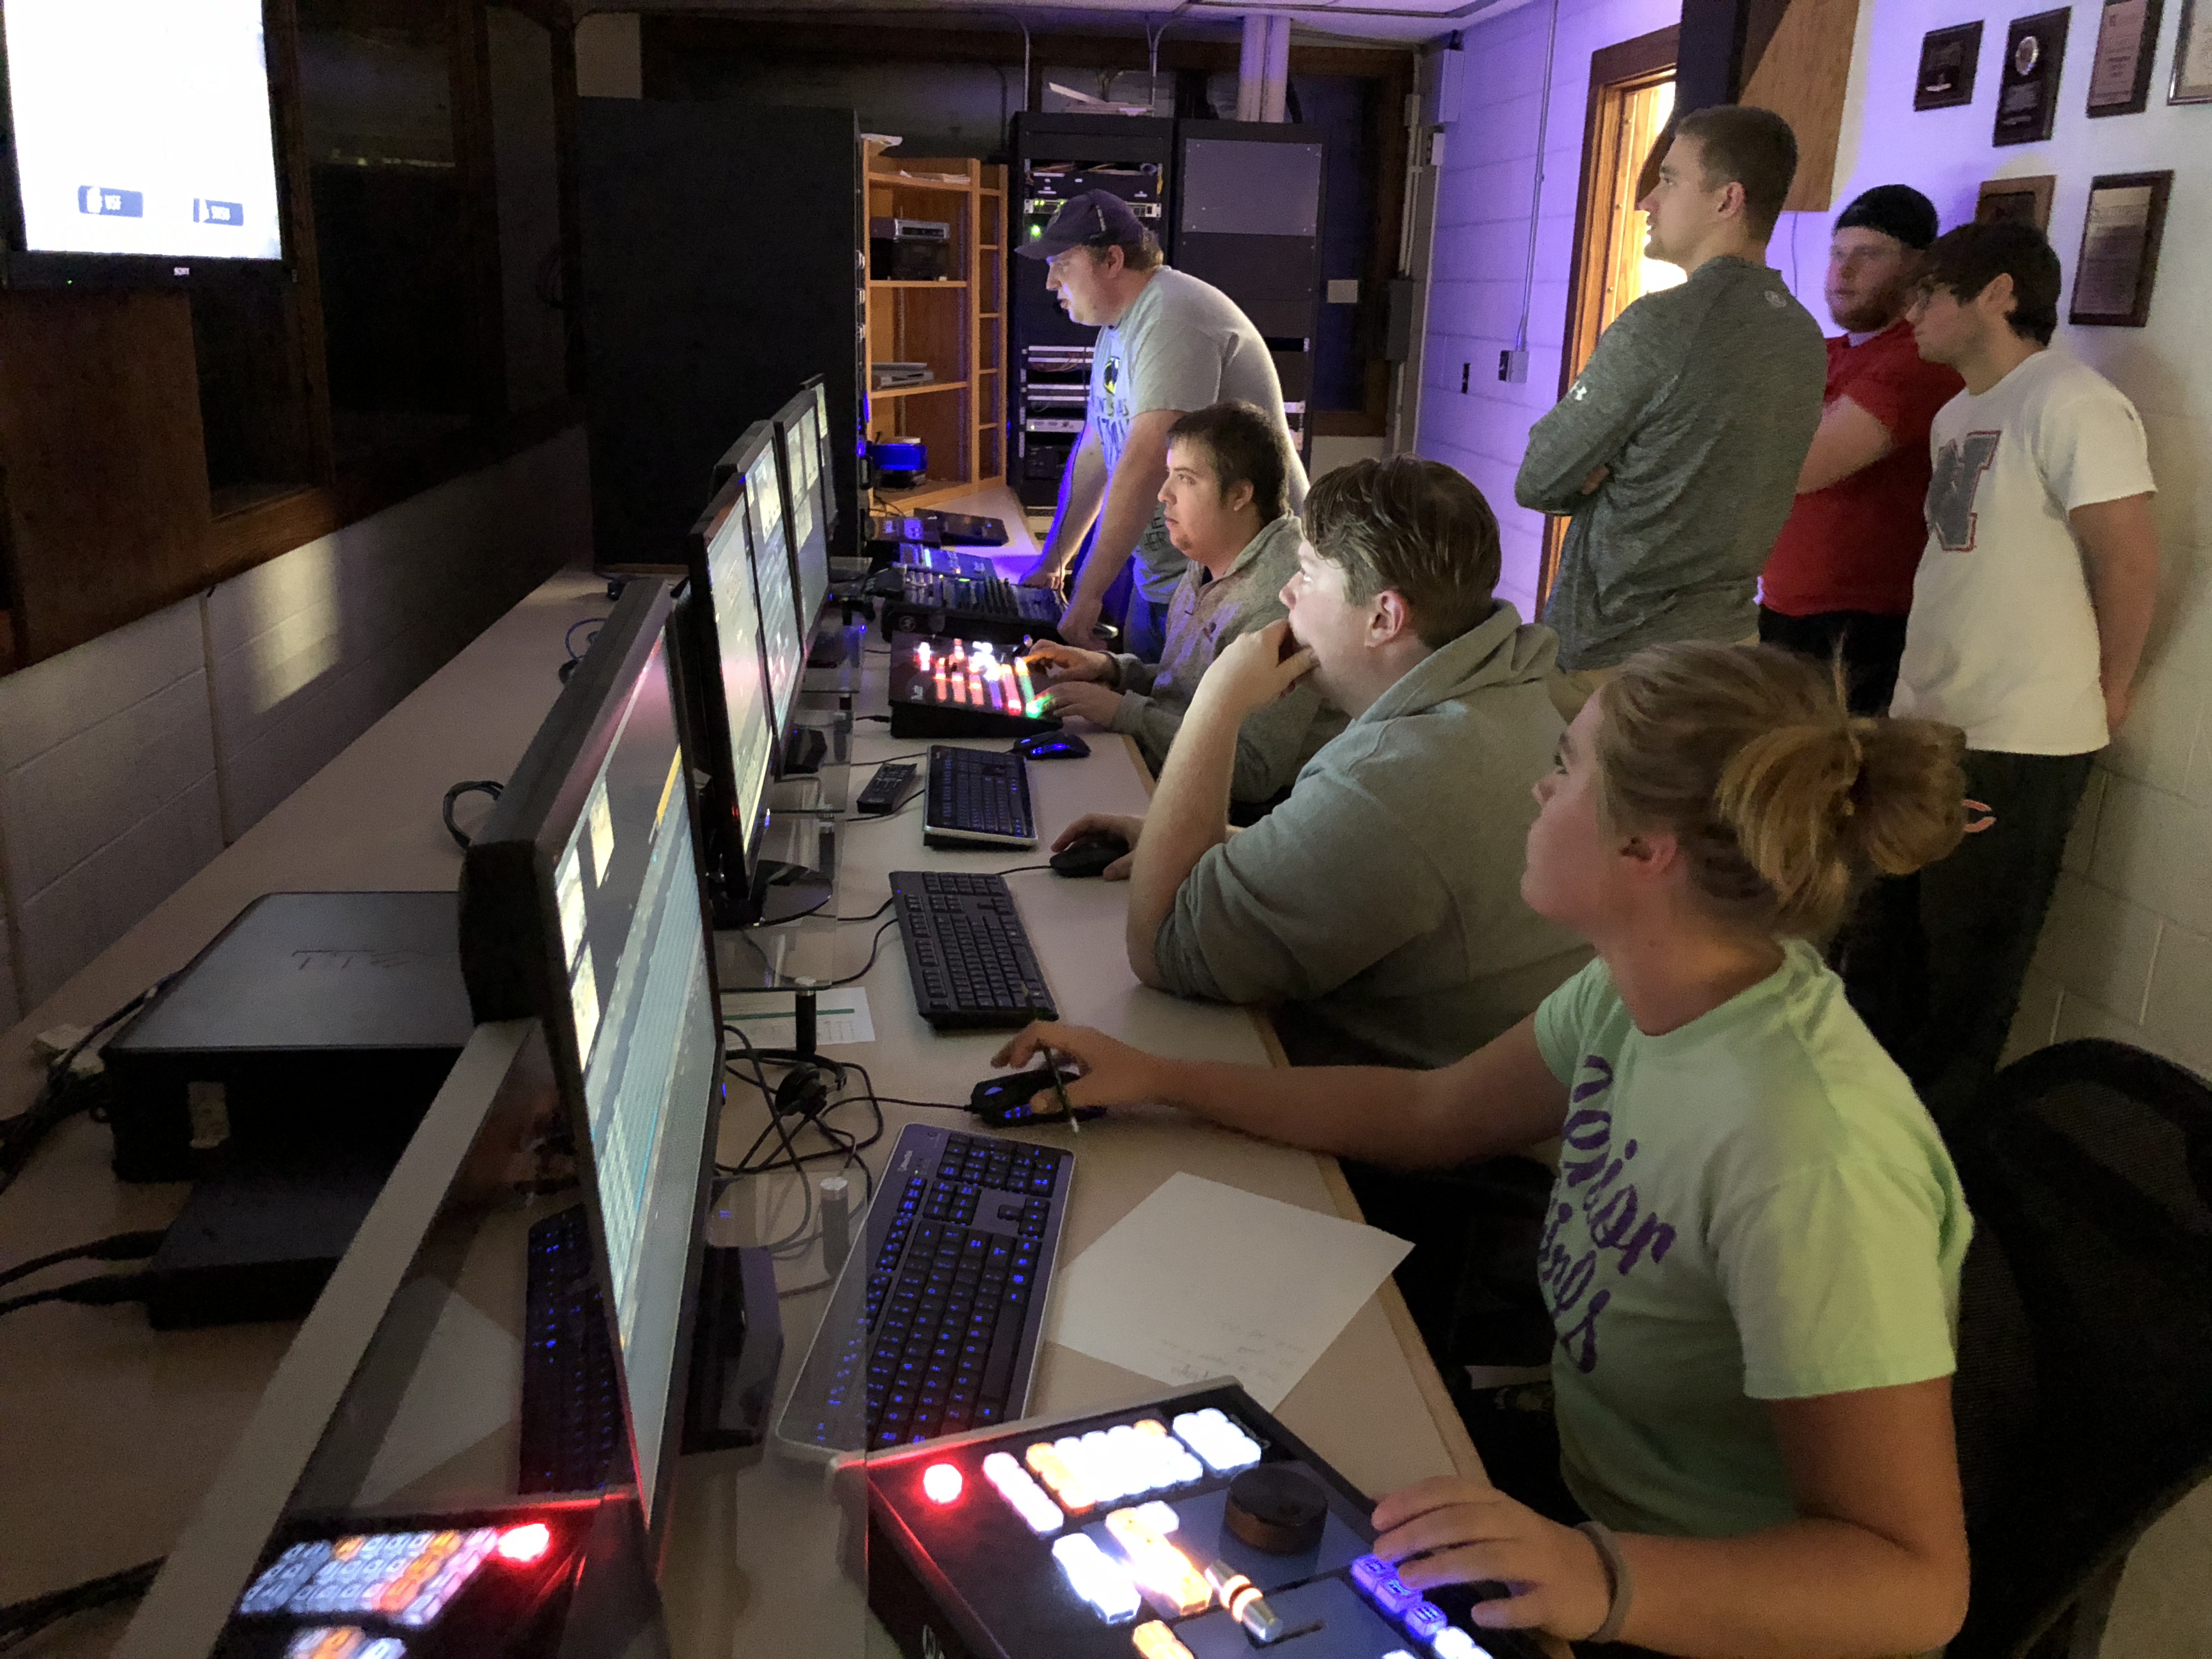 Nick Dahloff directing the Oct. 31, 2017 volleyball production from the control room